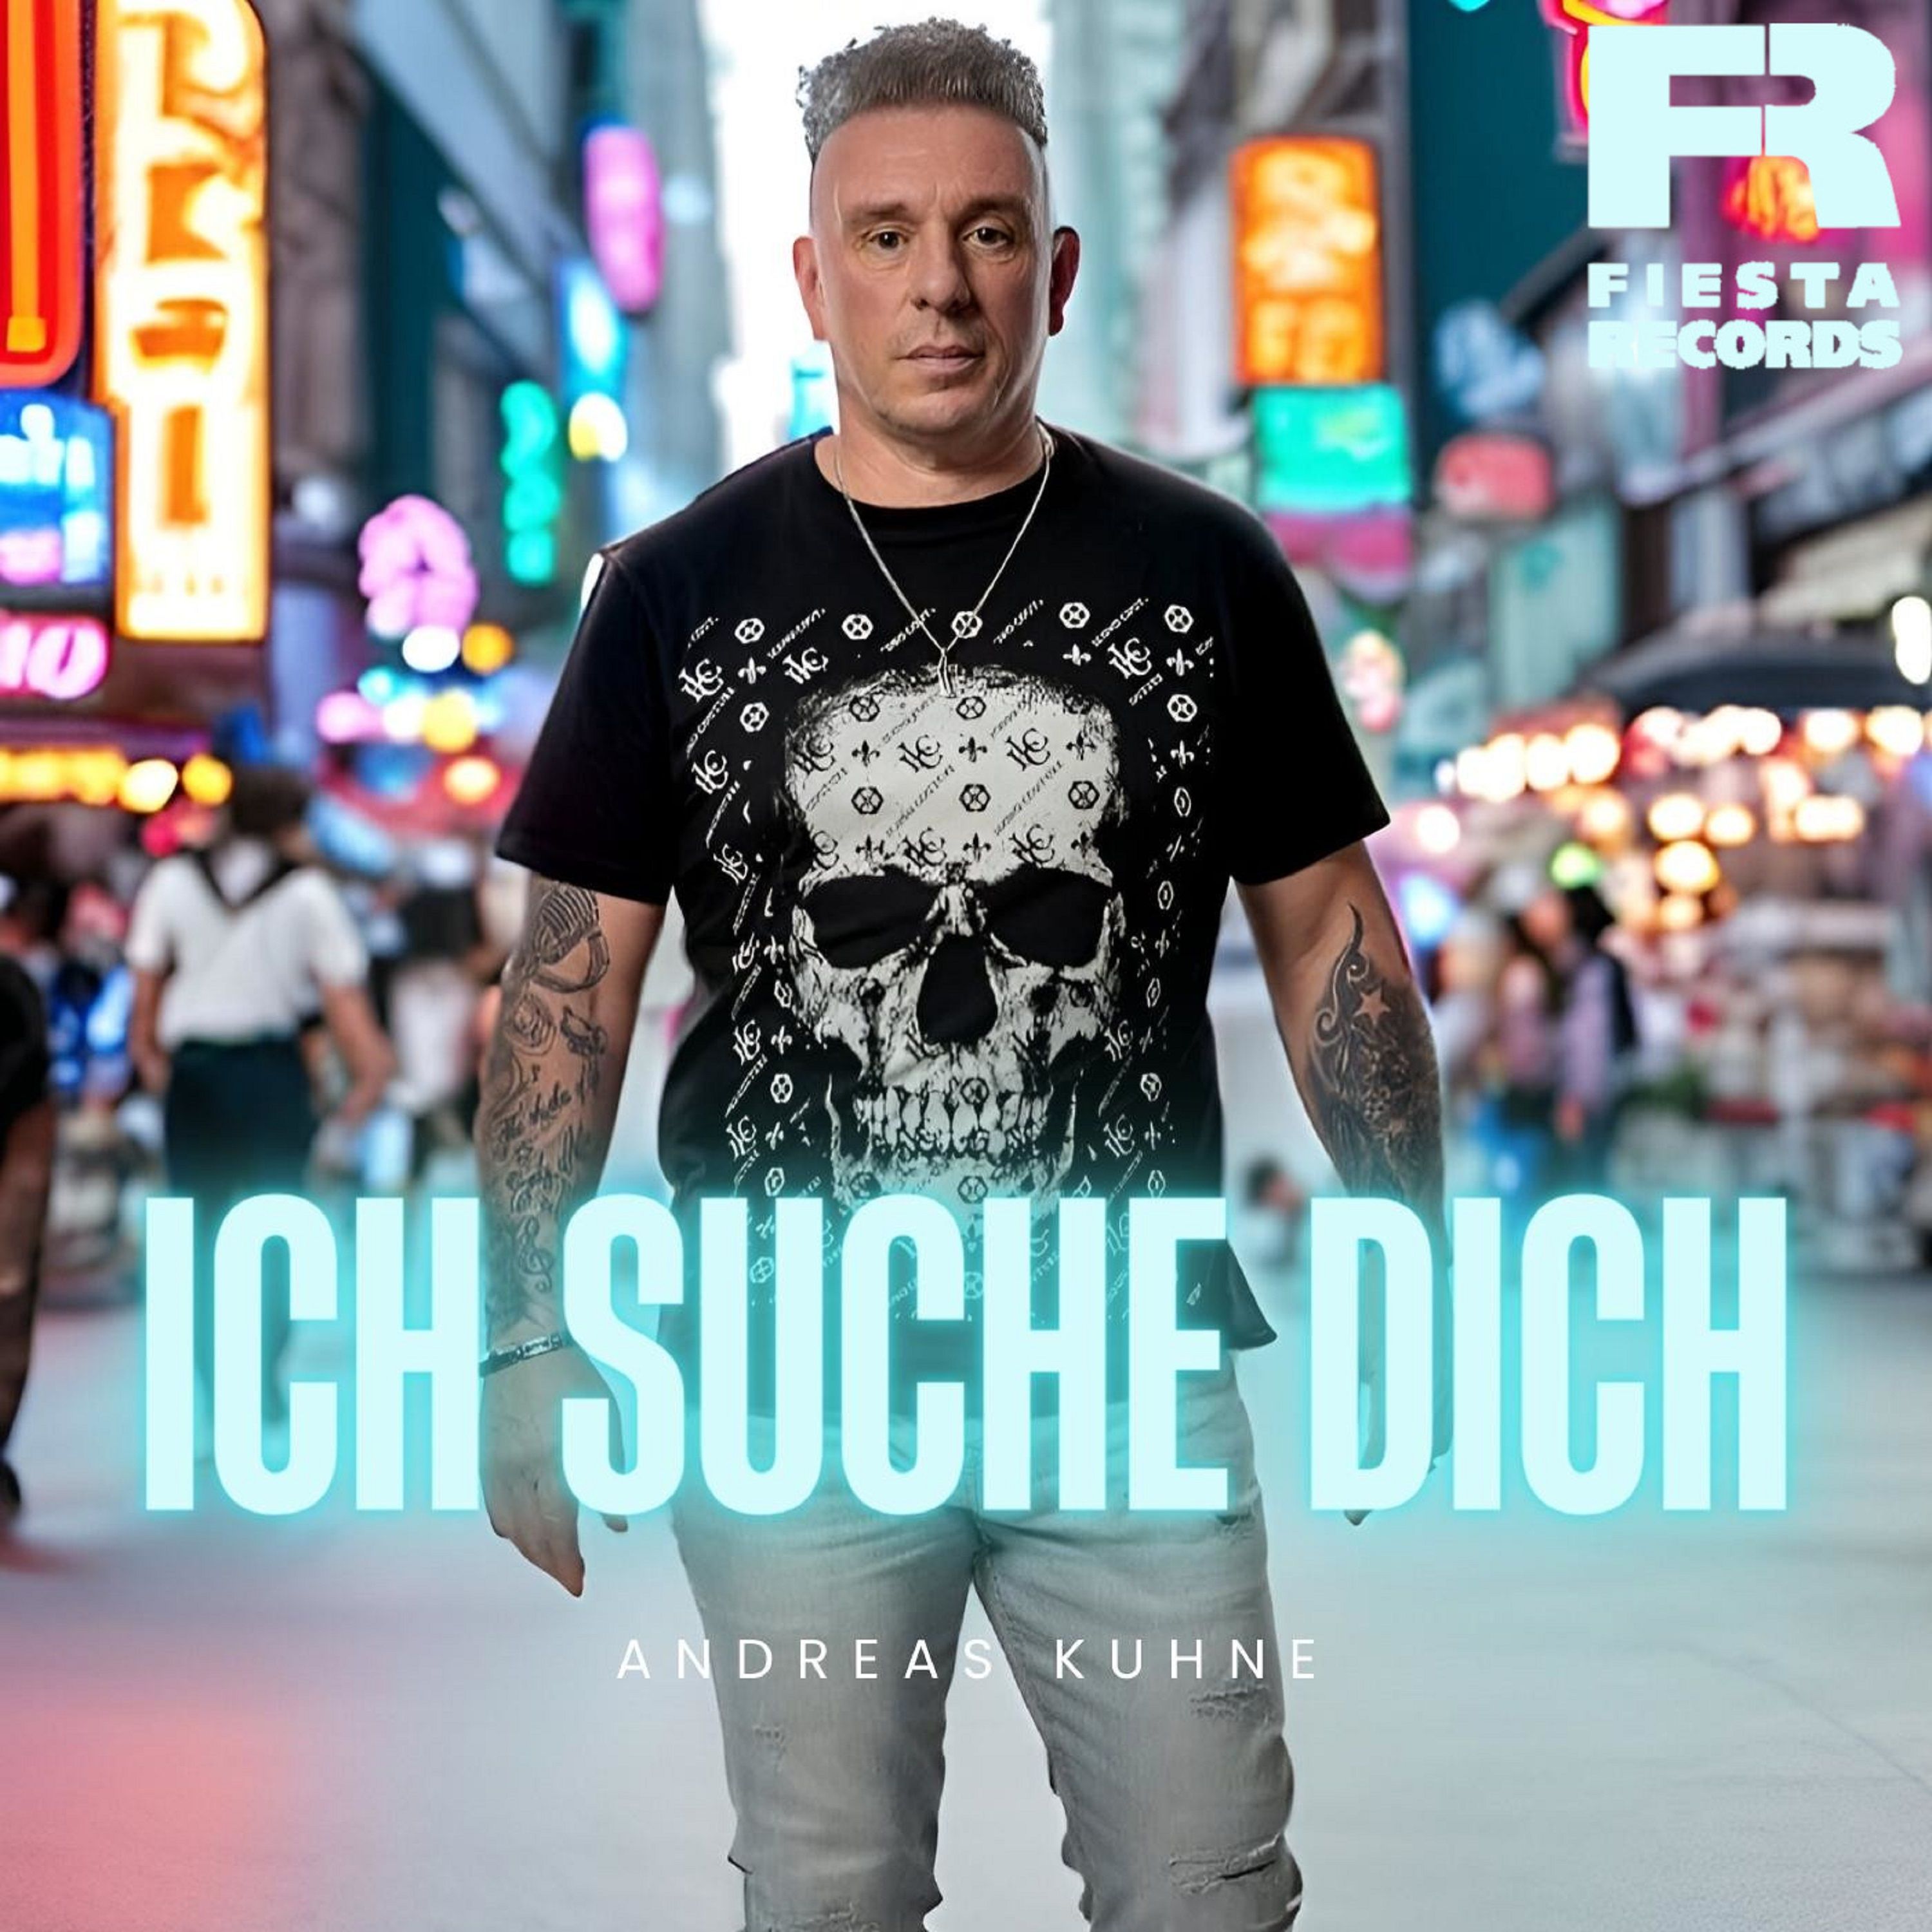 Andreas Kuhne - Ich suche Dich